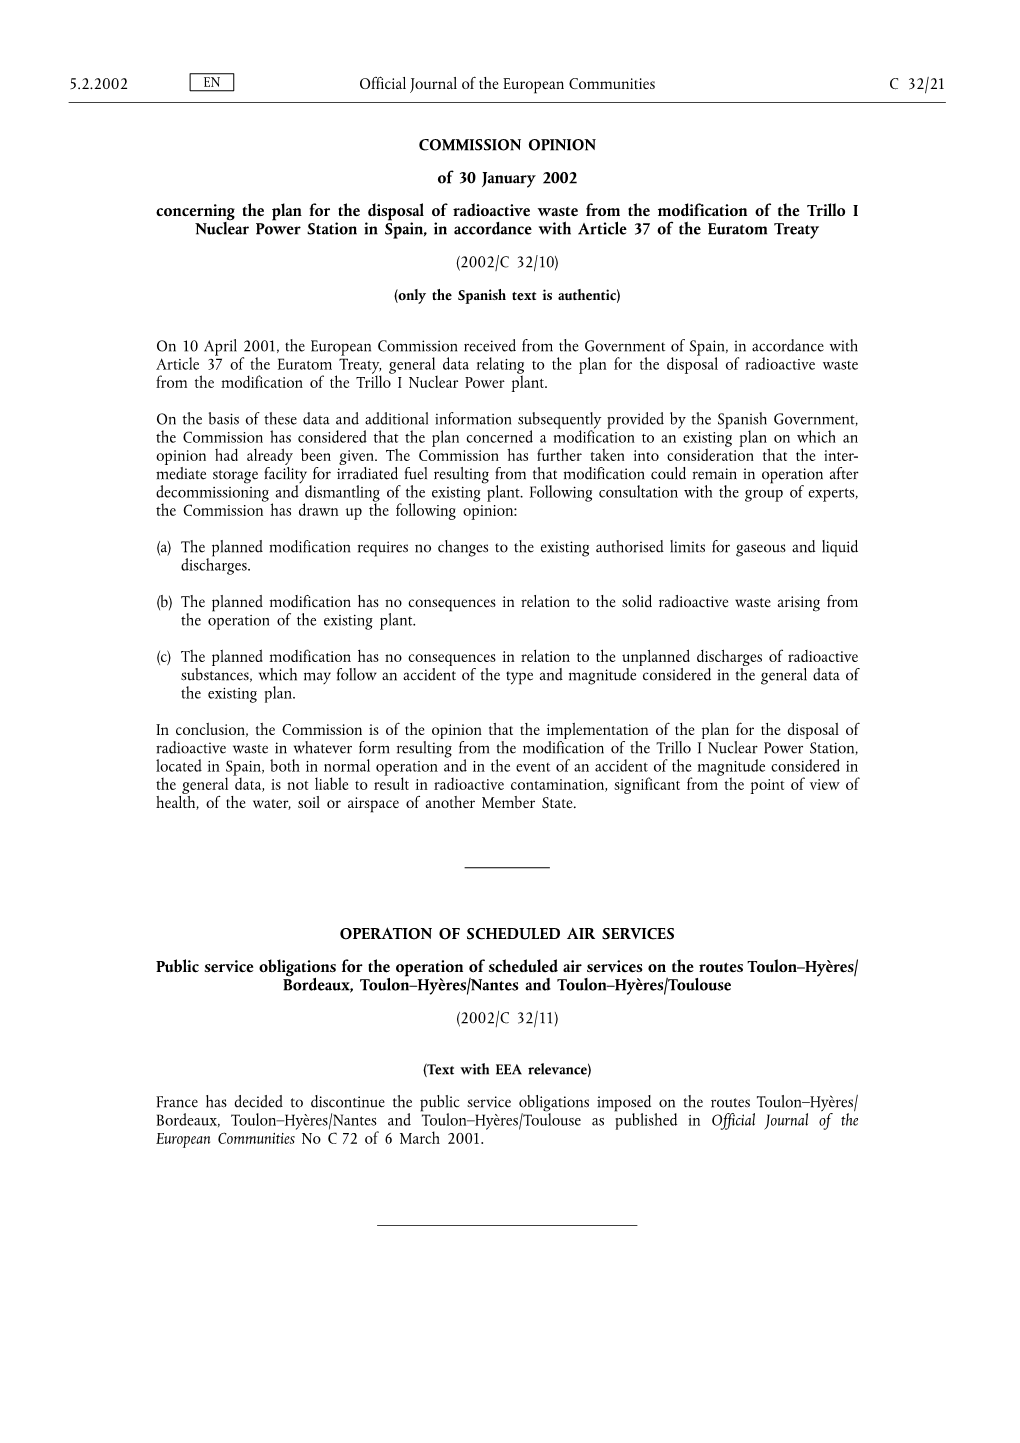 COMMISSION OPINION of 30 January 2002 Concerning the Plan for The